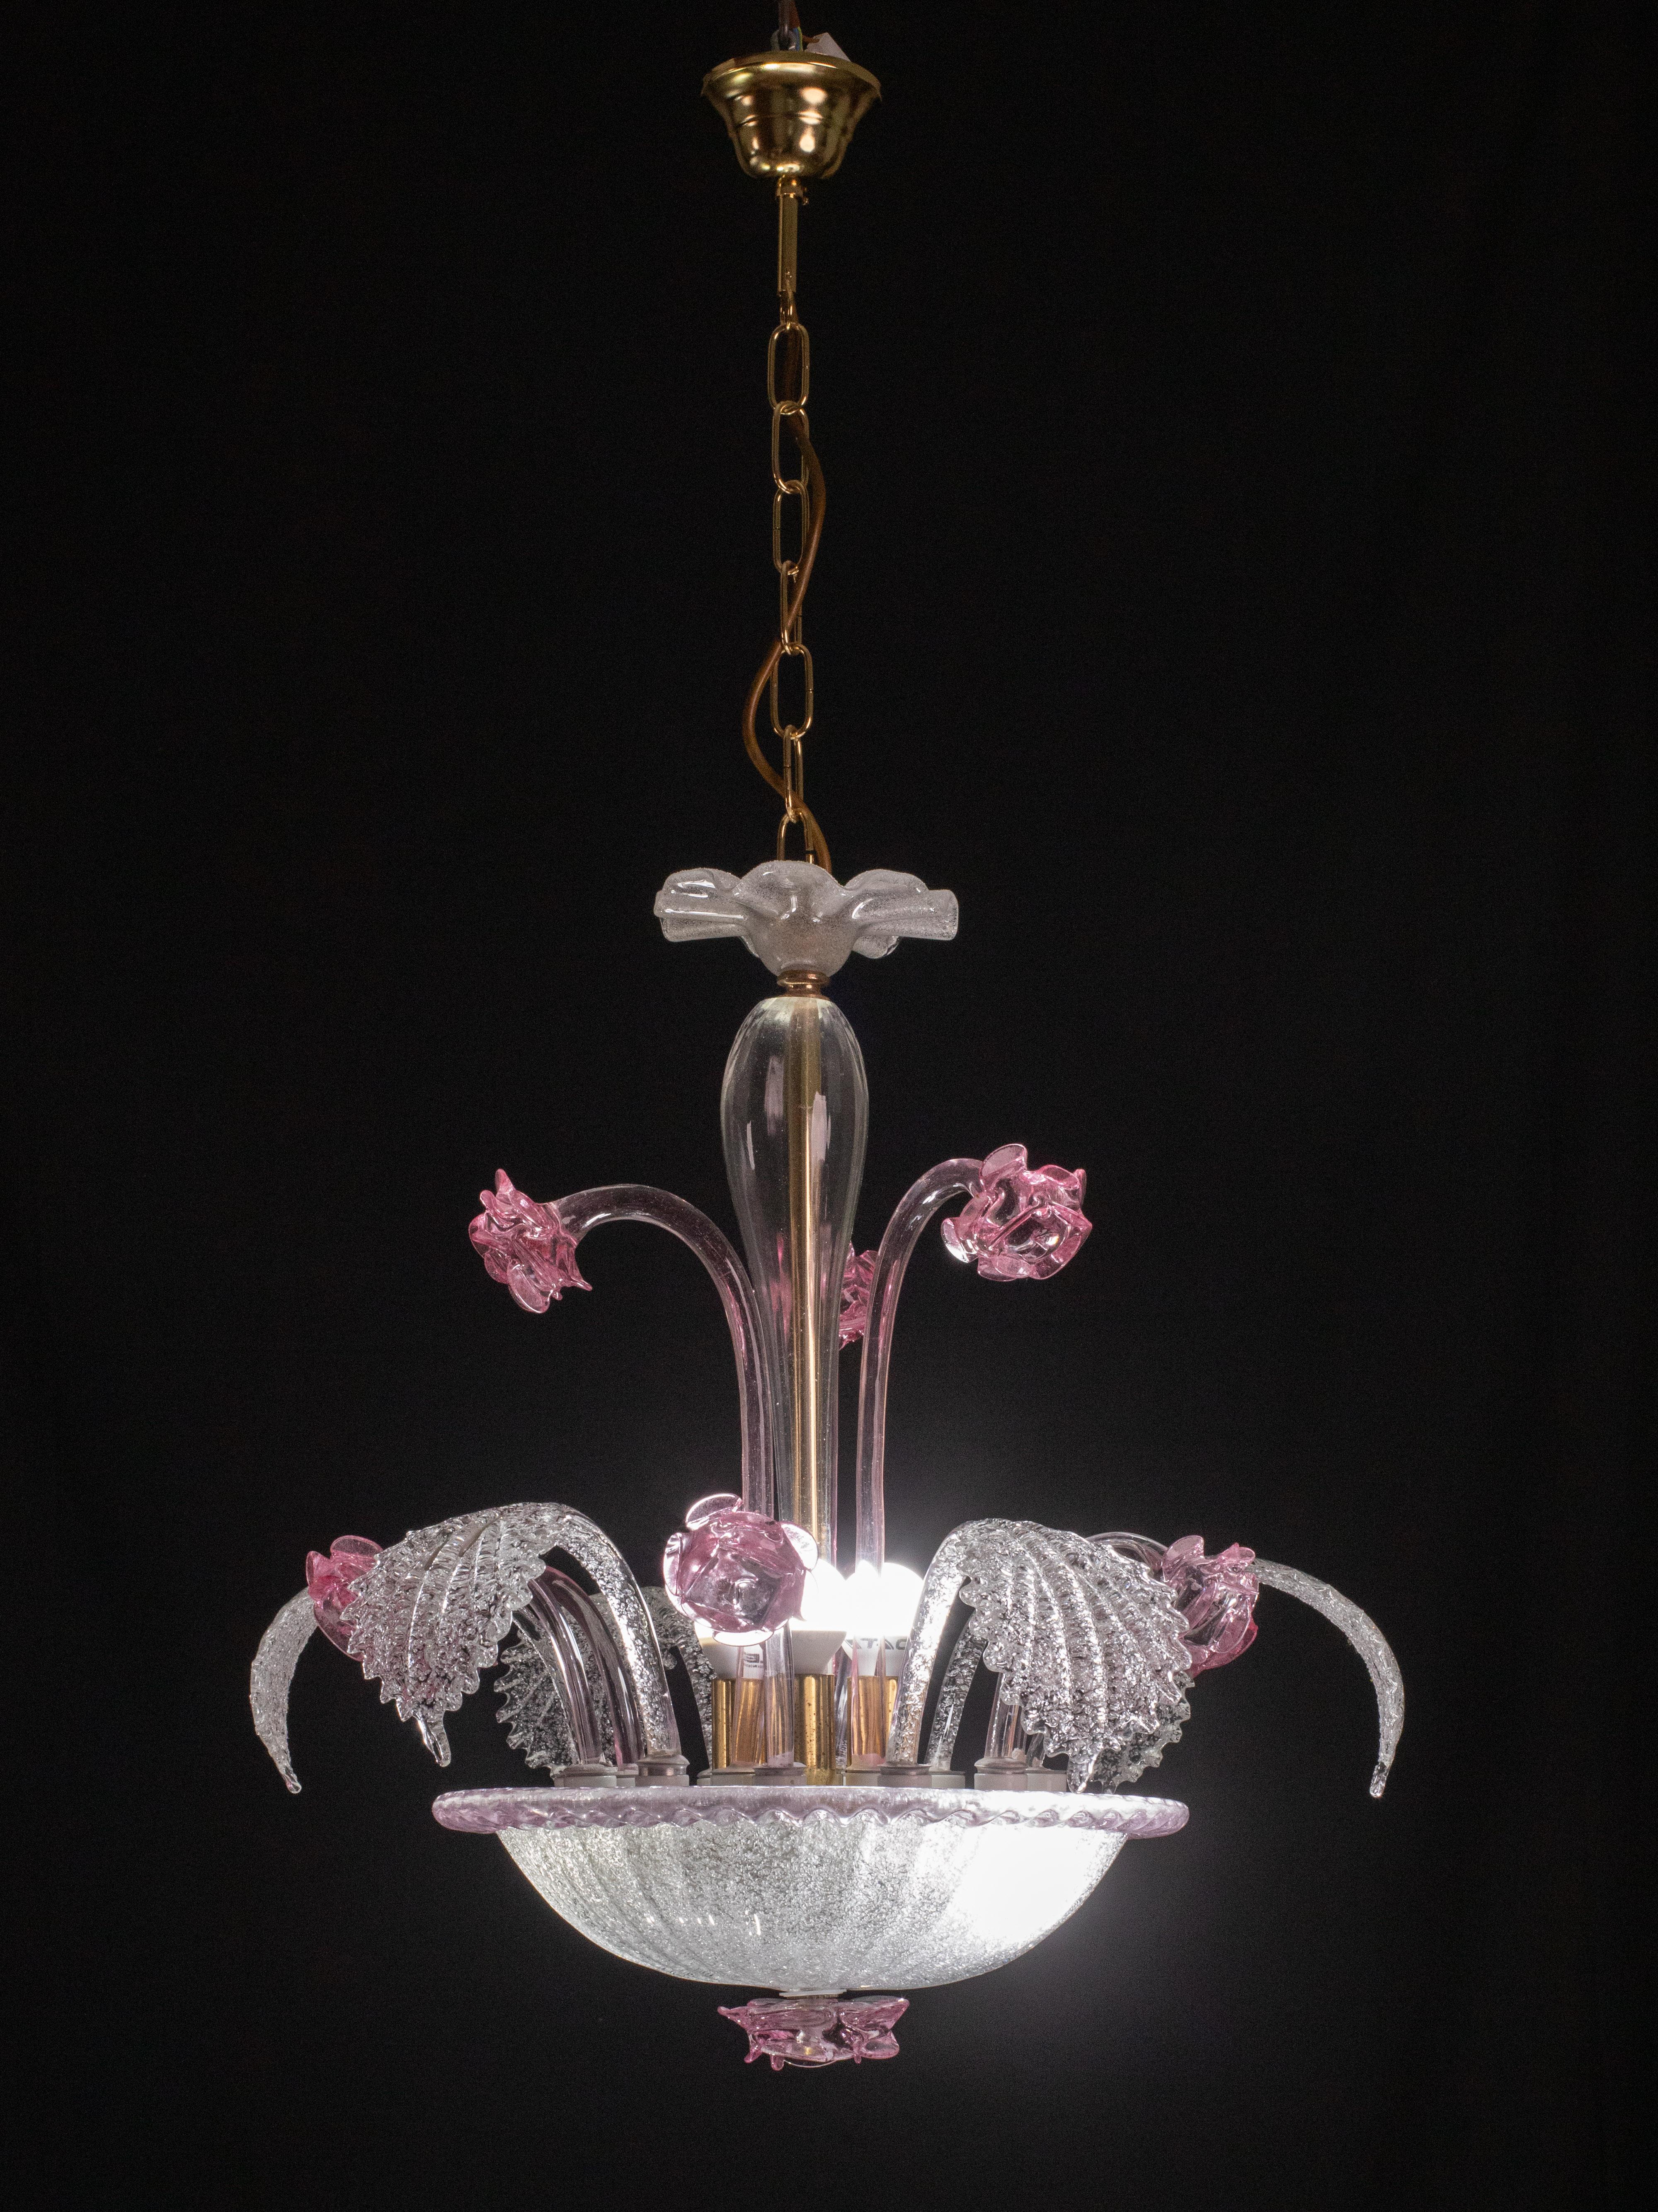 Stunning vintage Murano chandelier decorated with a dozen flowers and leaves.

It mounts 5 lights.

All glass is original.

The chain has been replaced, can be shortened or lengthened on request.

Height with chain 100 cm, height without chain 65